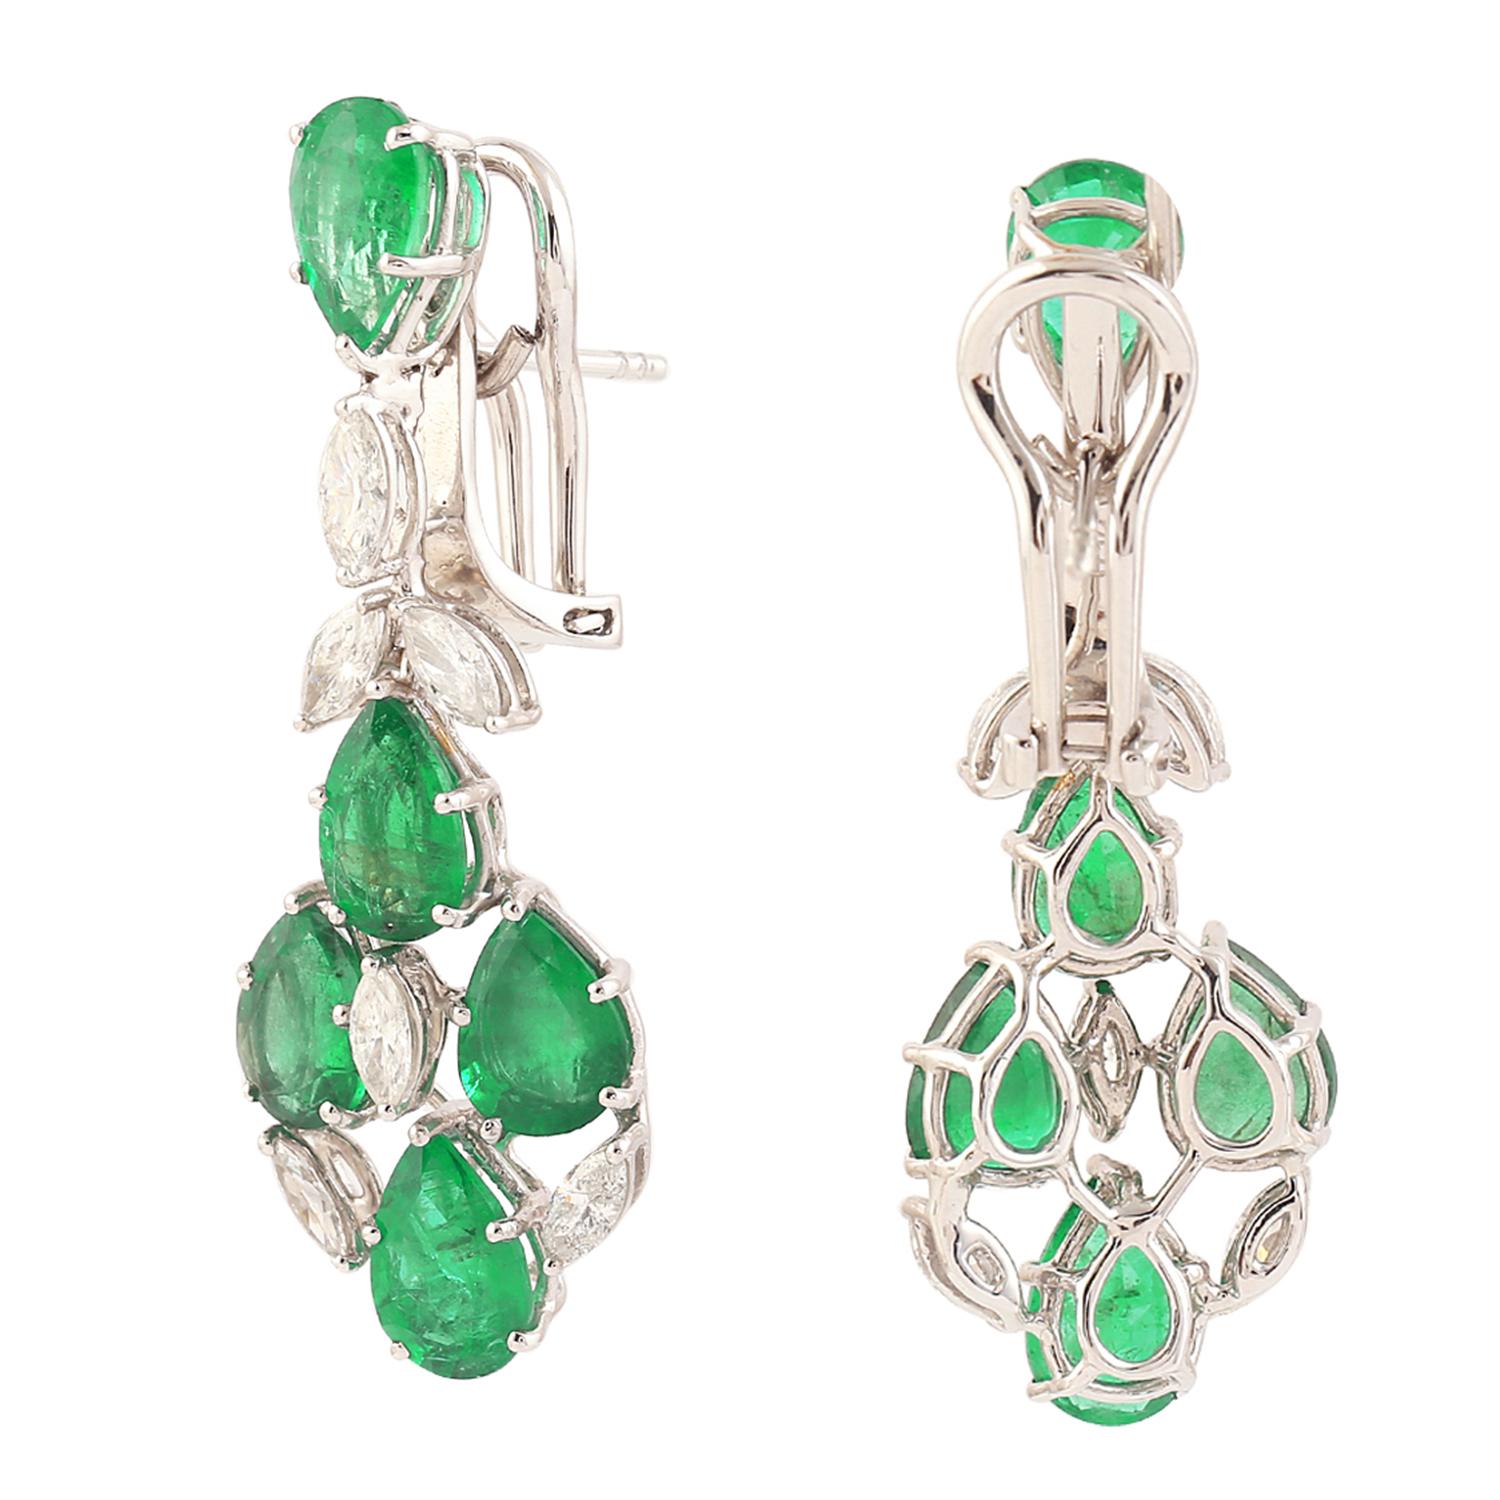 Cast in 14 karat gold, these exquisite earrings are hand set with 10.76 carats emerald and 1.62 carats of glimmering diamonds. 

FOLLOW MEGHNA JEWELS storefront to view the latest collection & exclusive pieces. Meghna Jewels is proudly rated as a